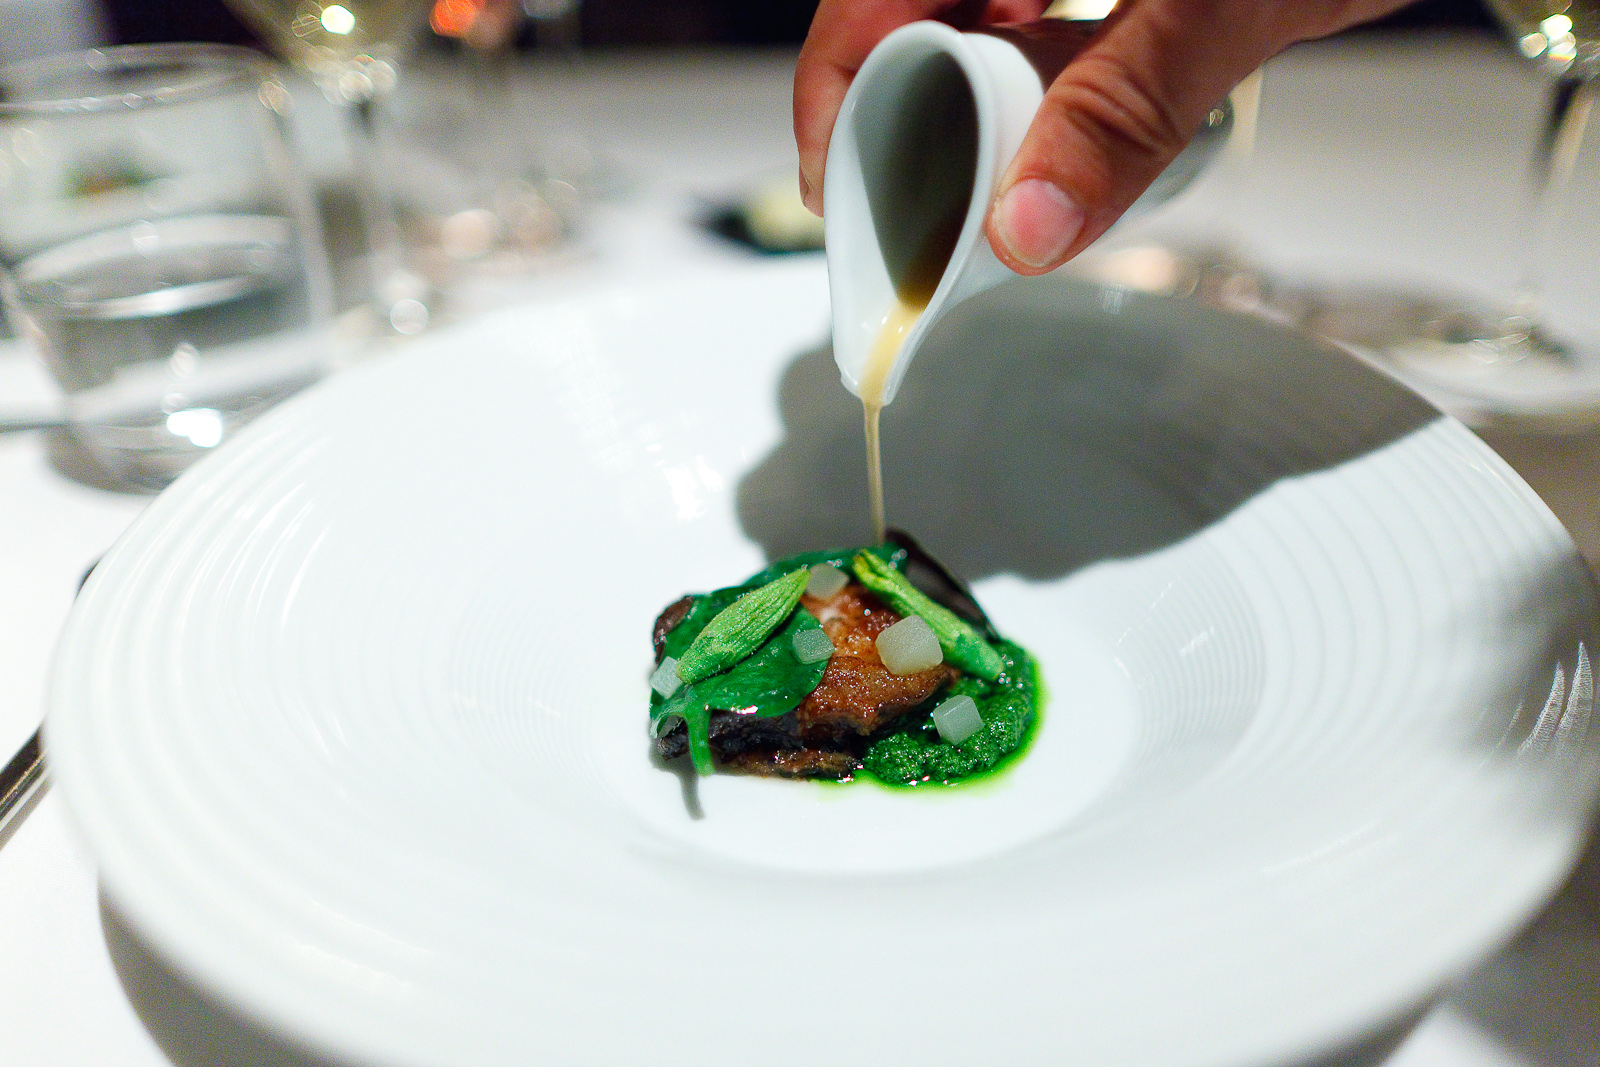 12th Course: Monterey bay abalone cooked in brown butter, pesto of pickled cucumber and walnut, Malabar spinach